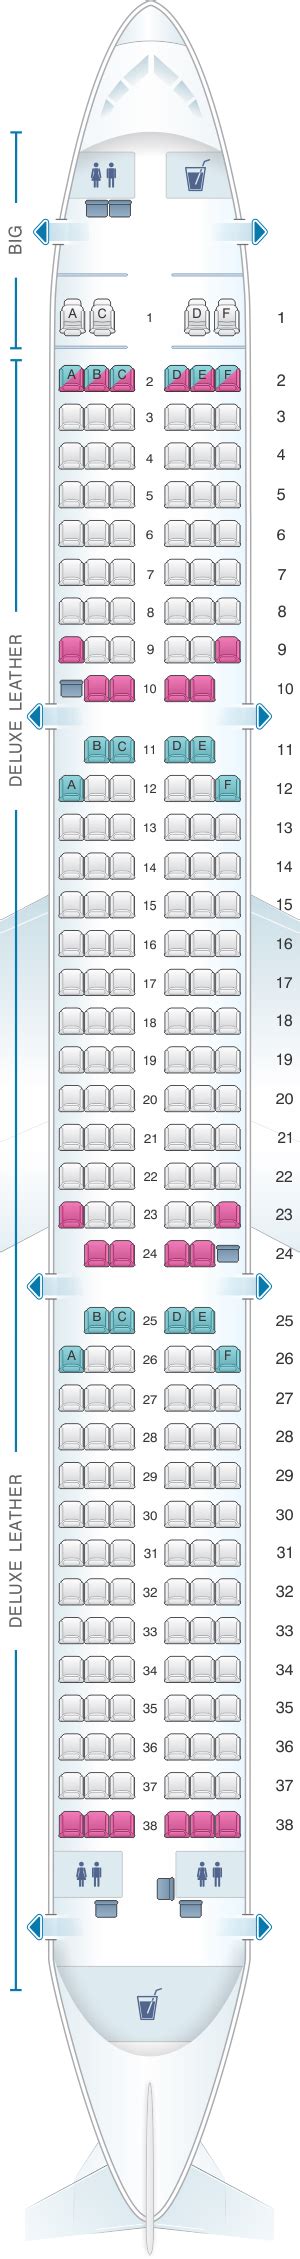 Seat Map Airbus A321 200 Spirit Airlines Best Seats In The Plane Gambaran